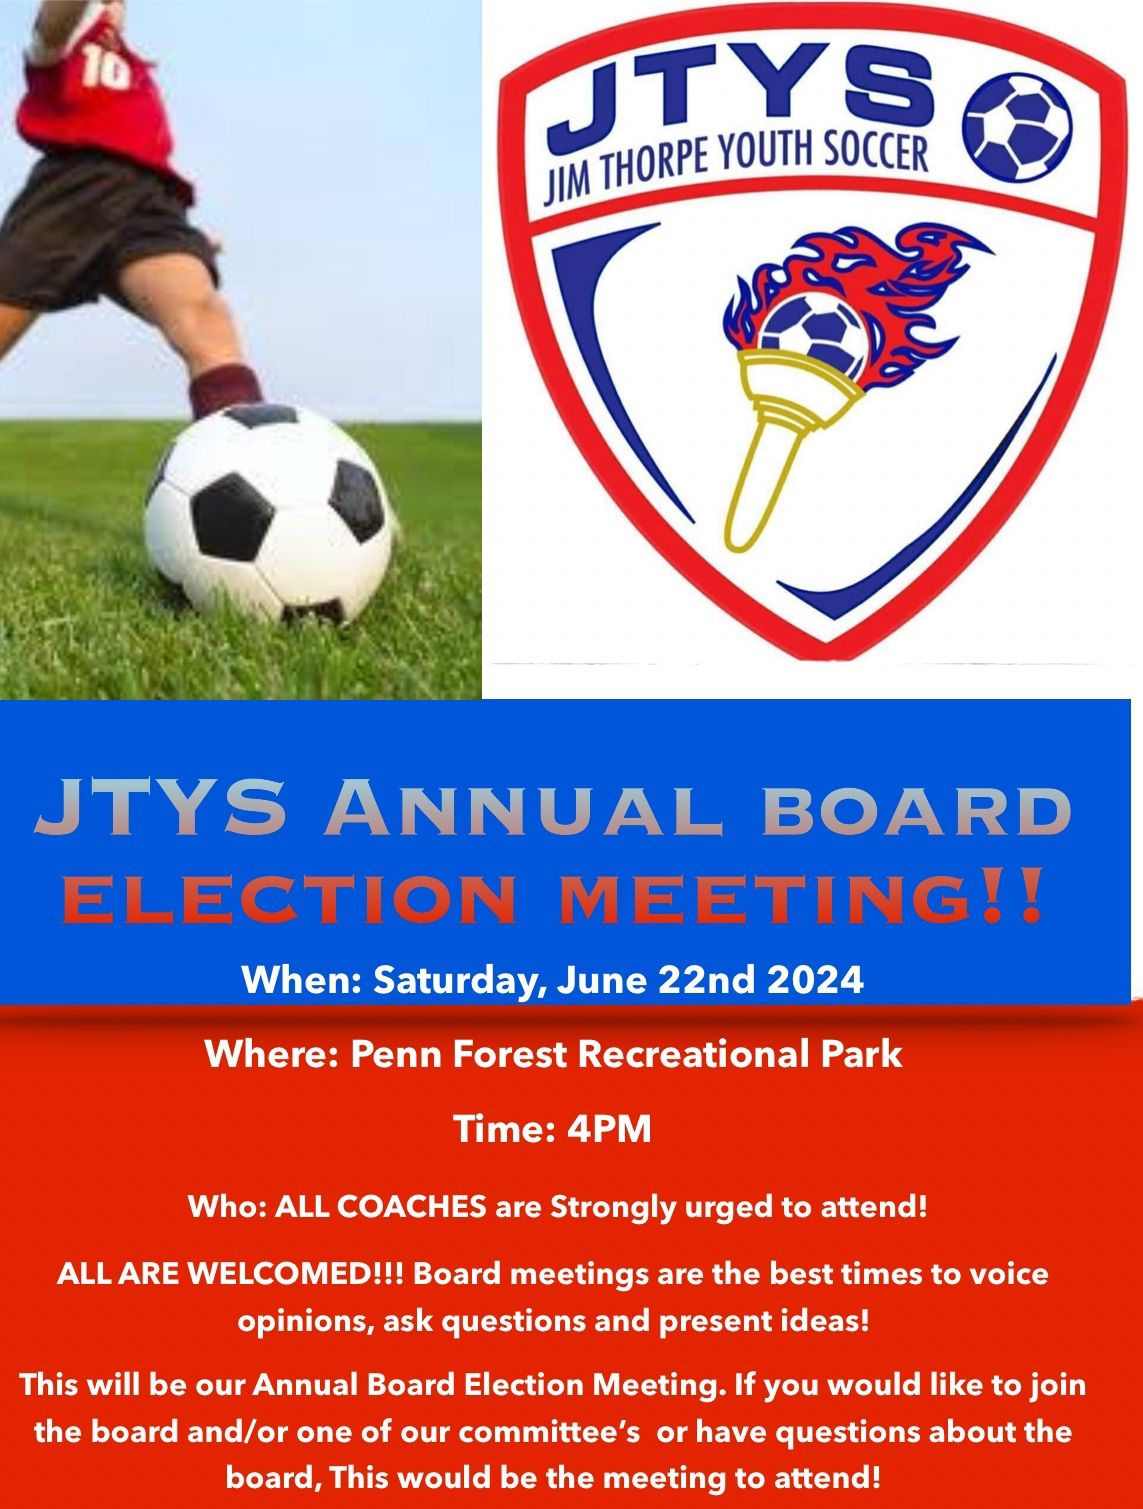 JTYS Annual Board Elections Meeting